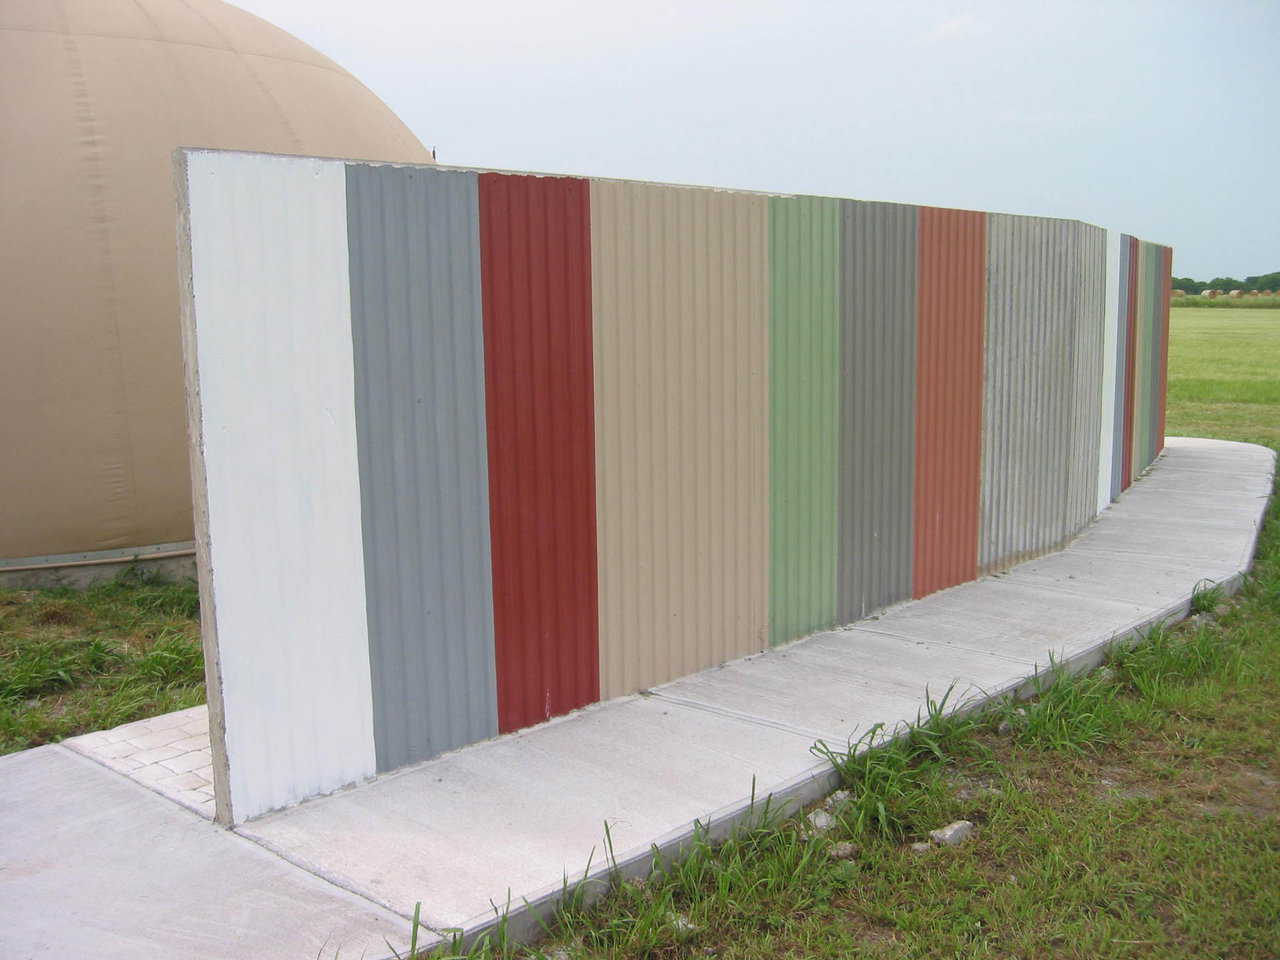 Corrugated steel appearance — The texture on this fence was achieved by using corrugated steel as the form.